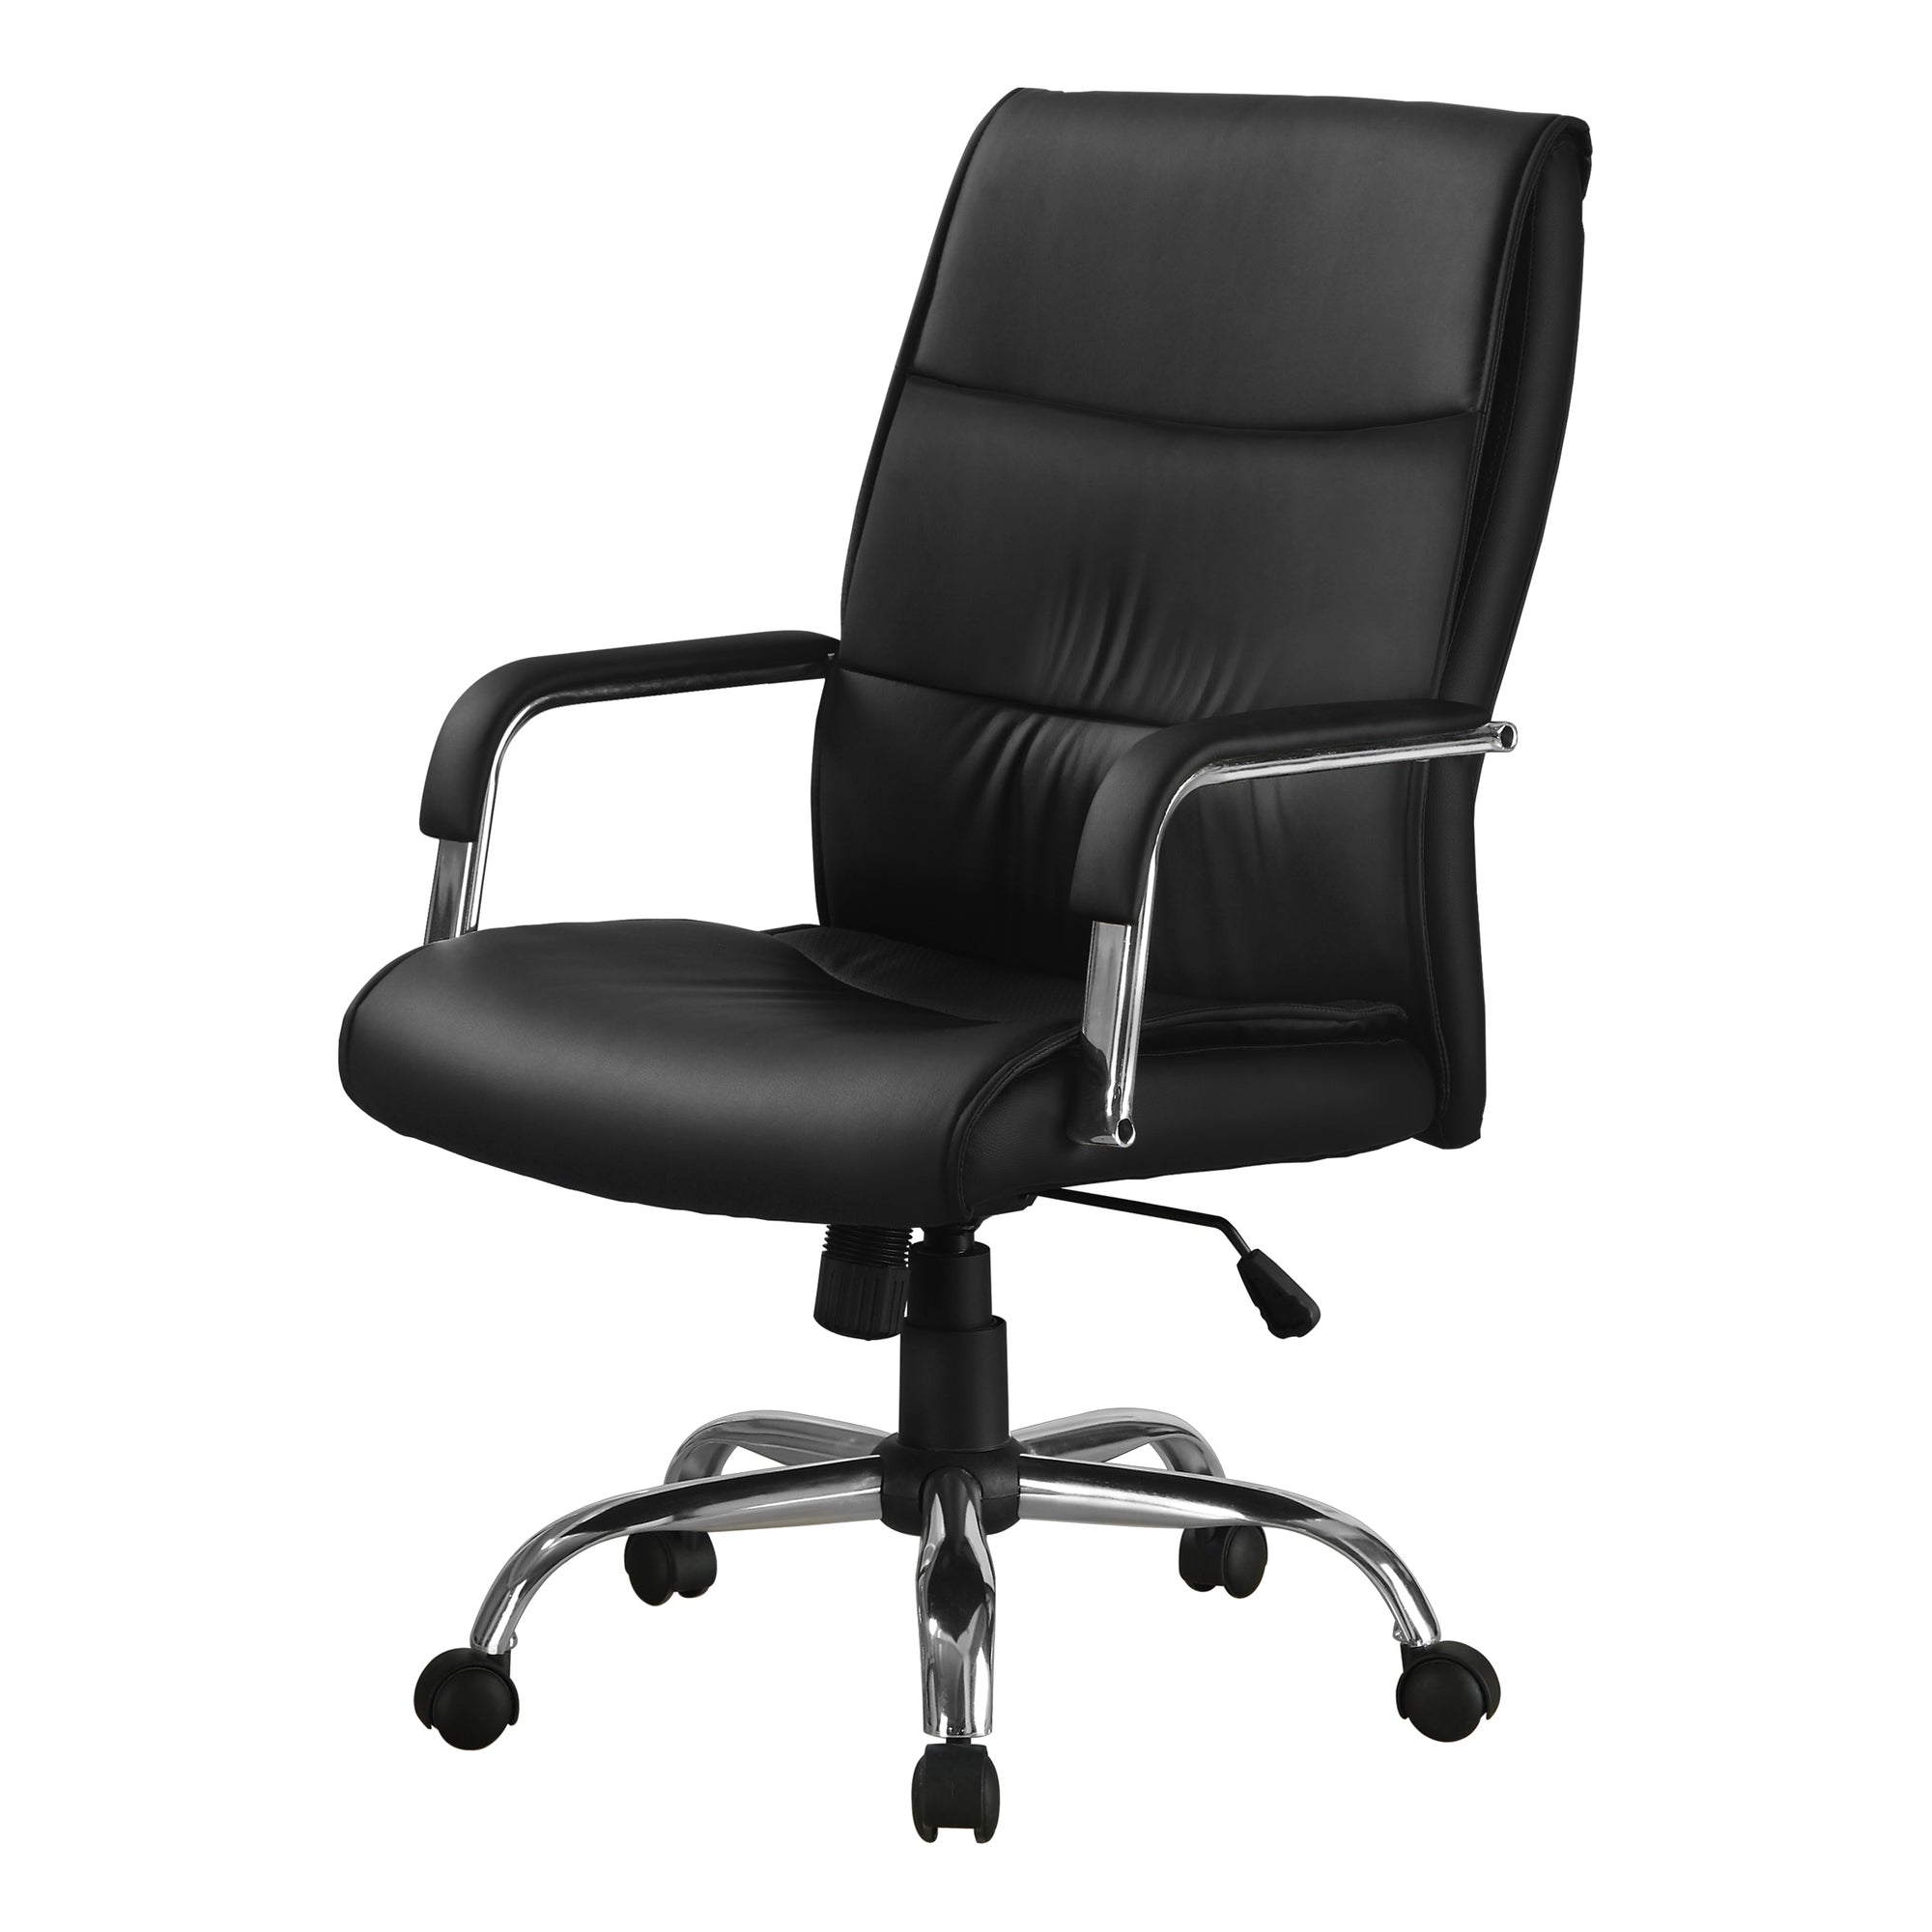 Office Chair - Black Leather-Look Fabric